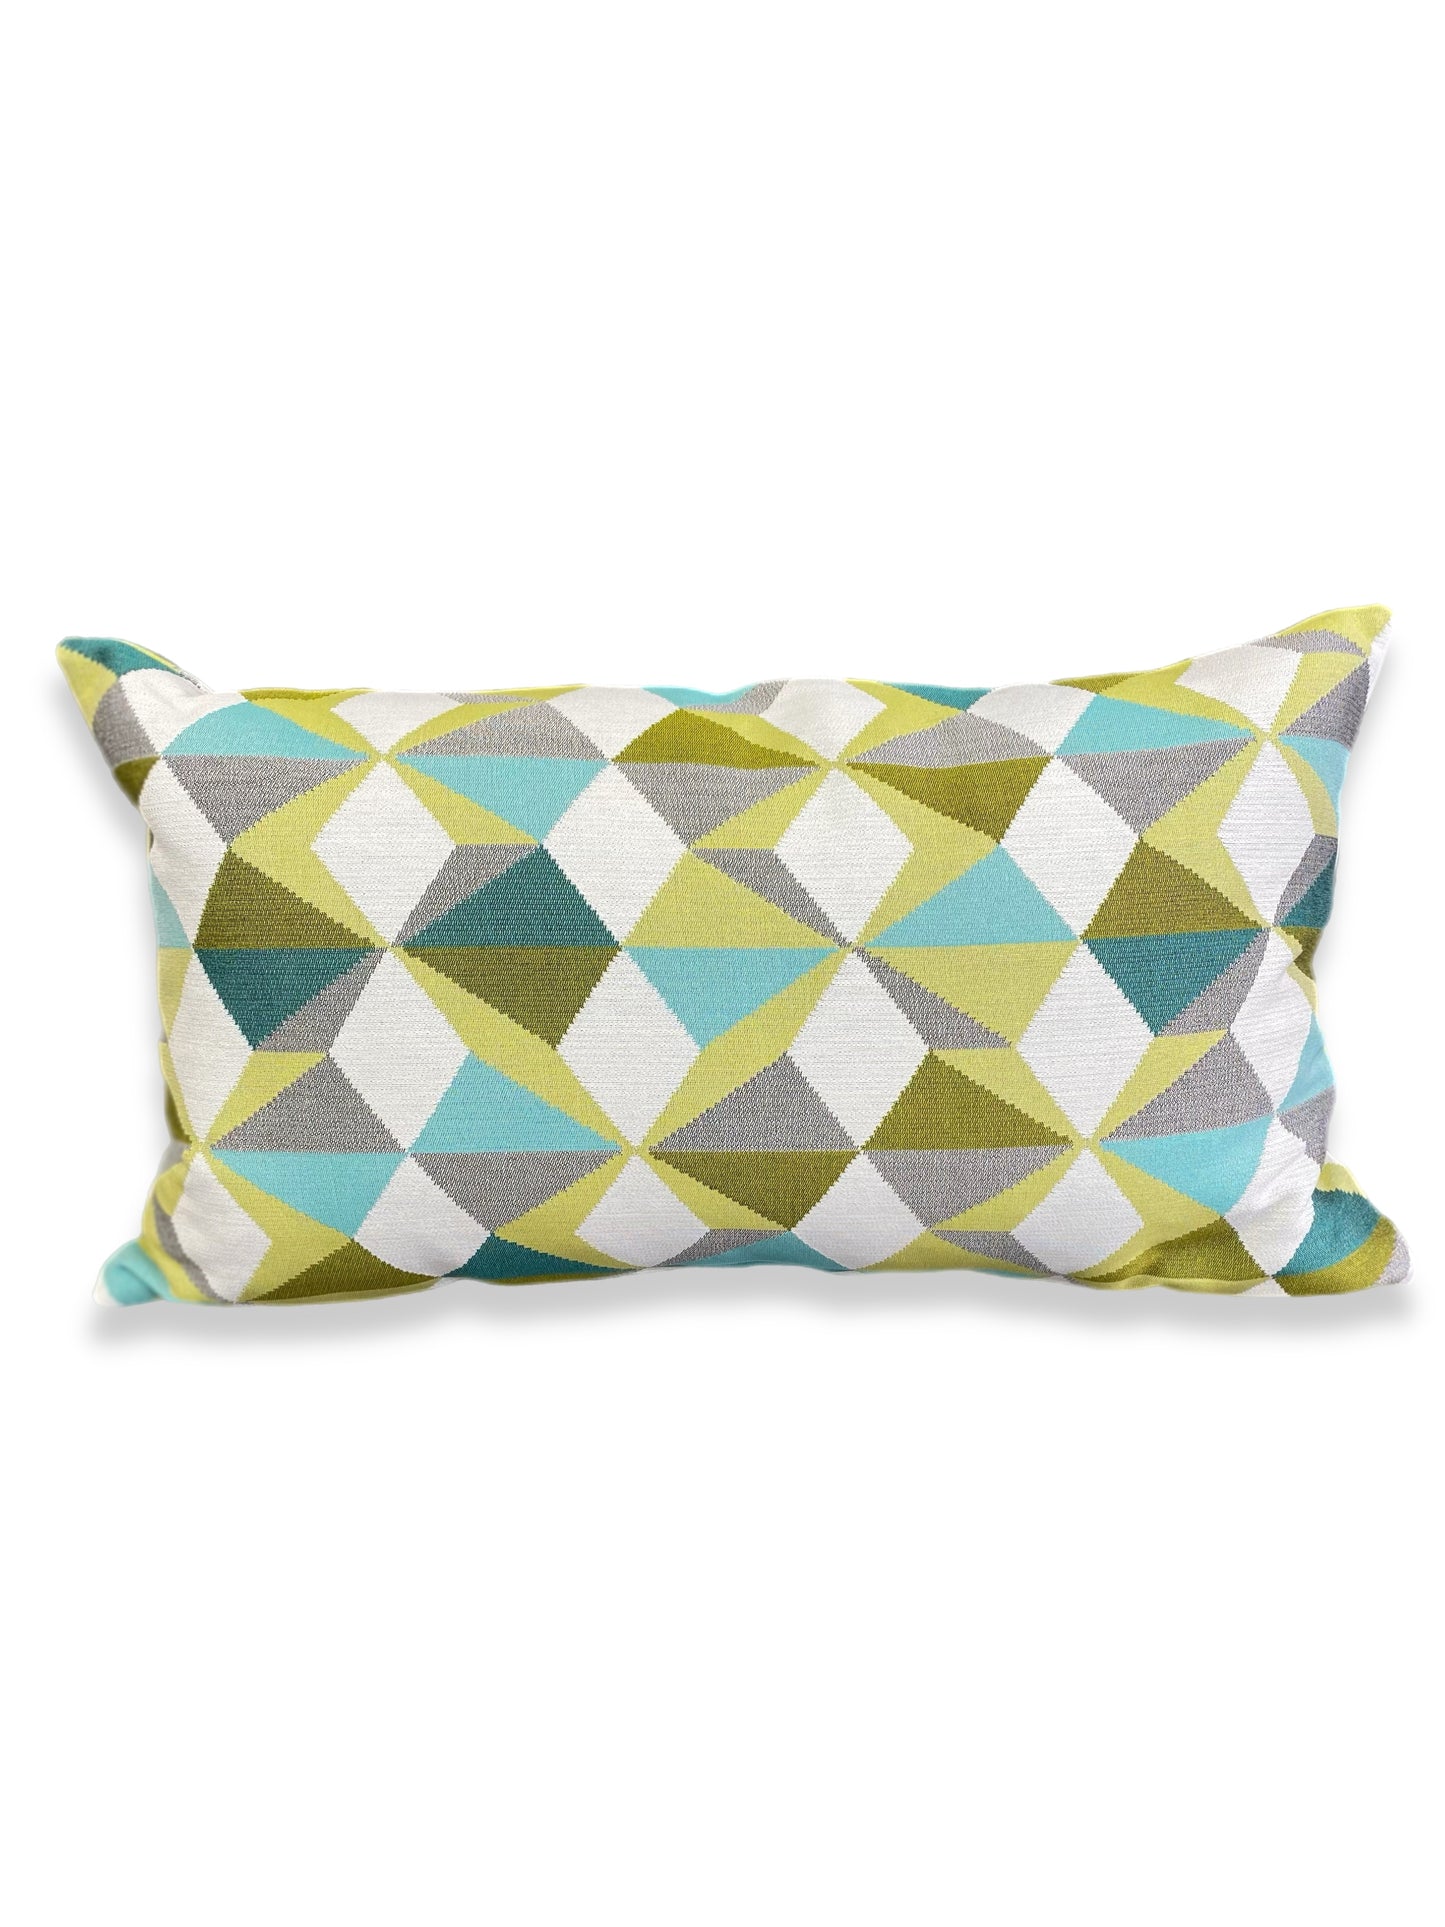 Luxury Lumbar Pillow - 24" x 14" - Movie Colony- A classic Palm Springs color pallet of lime, teal, turquoise, and gray on a bright white background in a modernistic geometric pattern